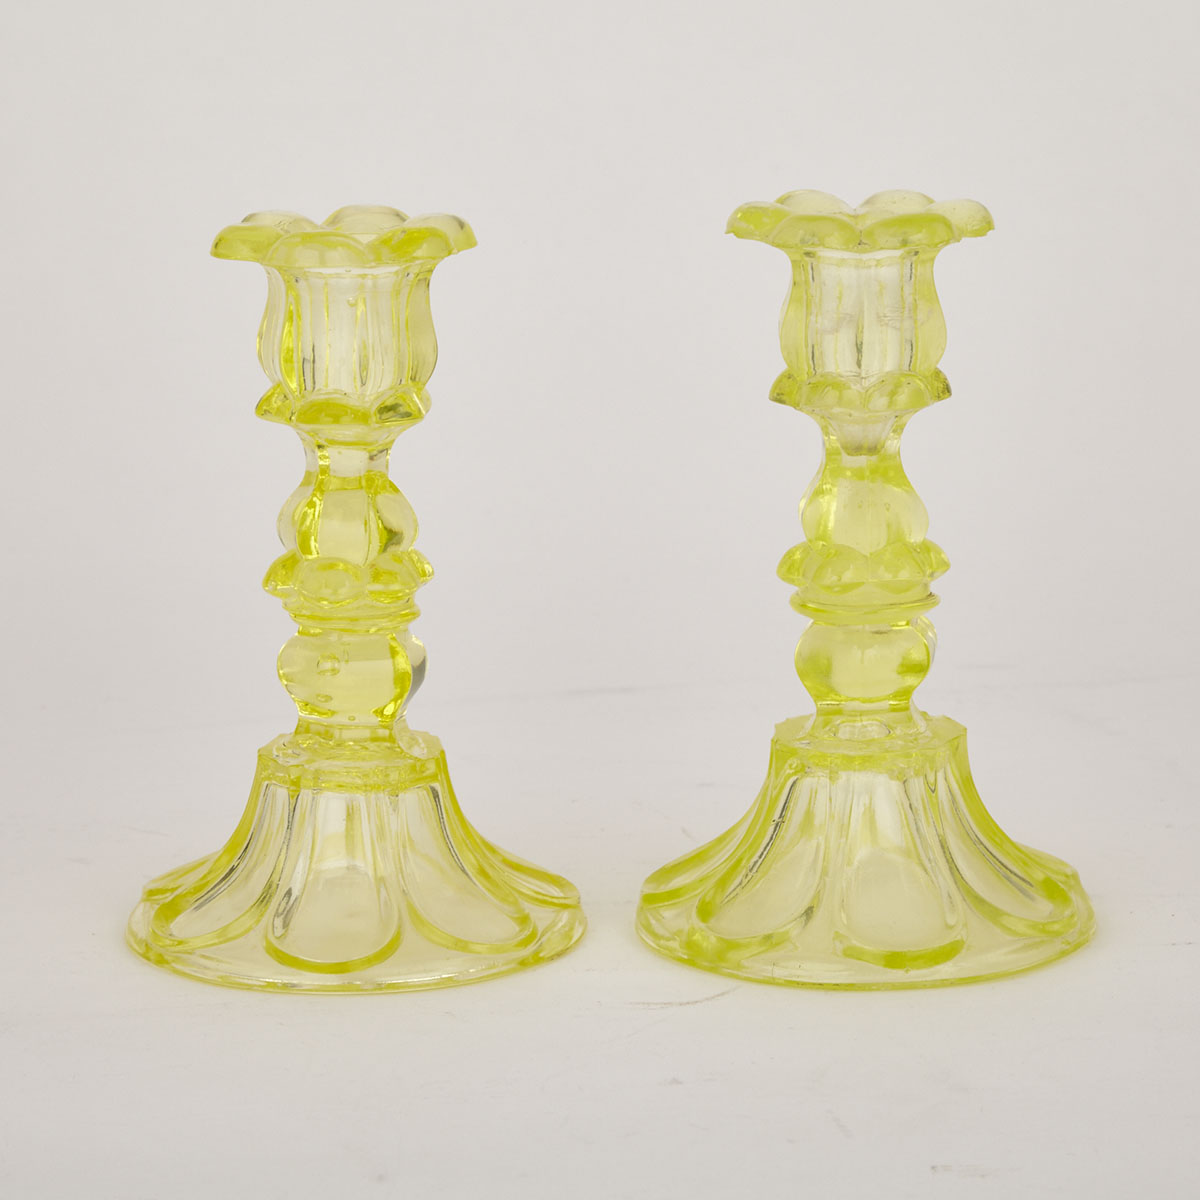 Pair of Boston & Sandwich Glass Co. Canary Yellow Petal and Loop Candlesticks, c.1850